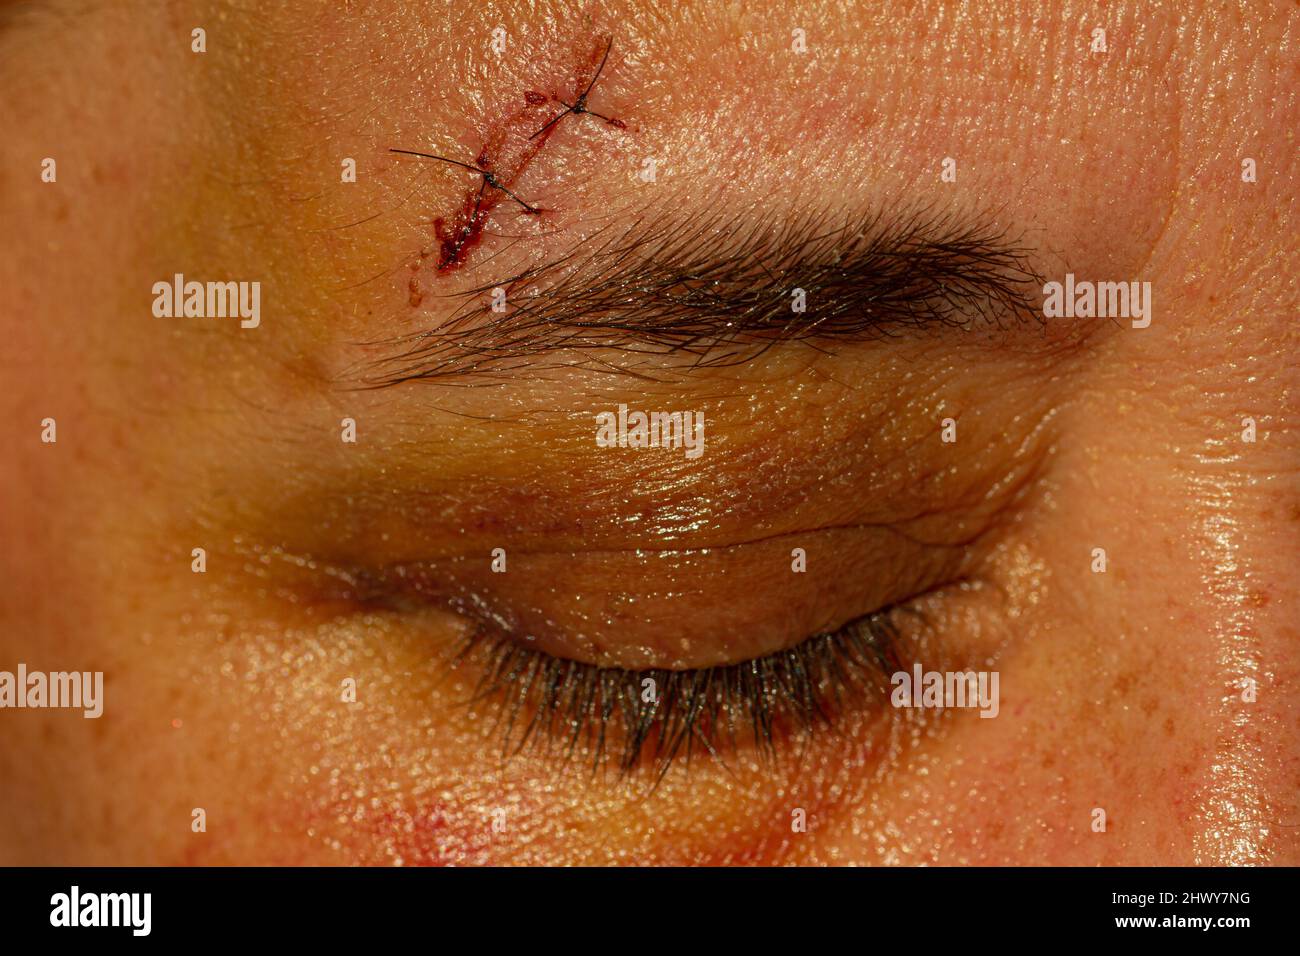 Middle age white woman with stitches above her eye due to a fall. Stock Photo